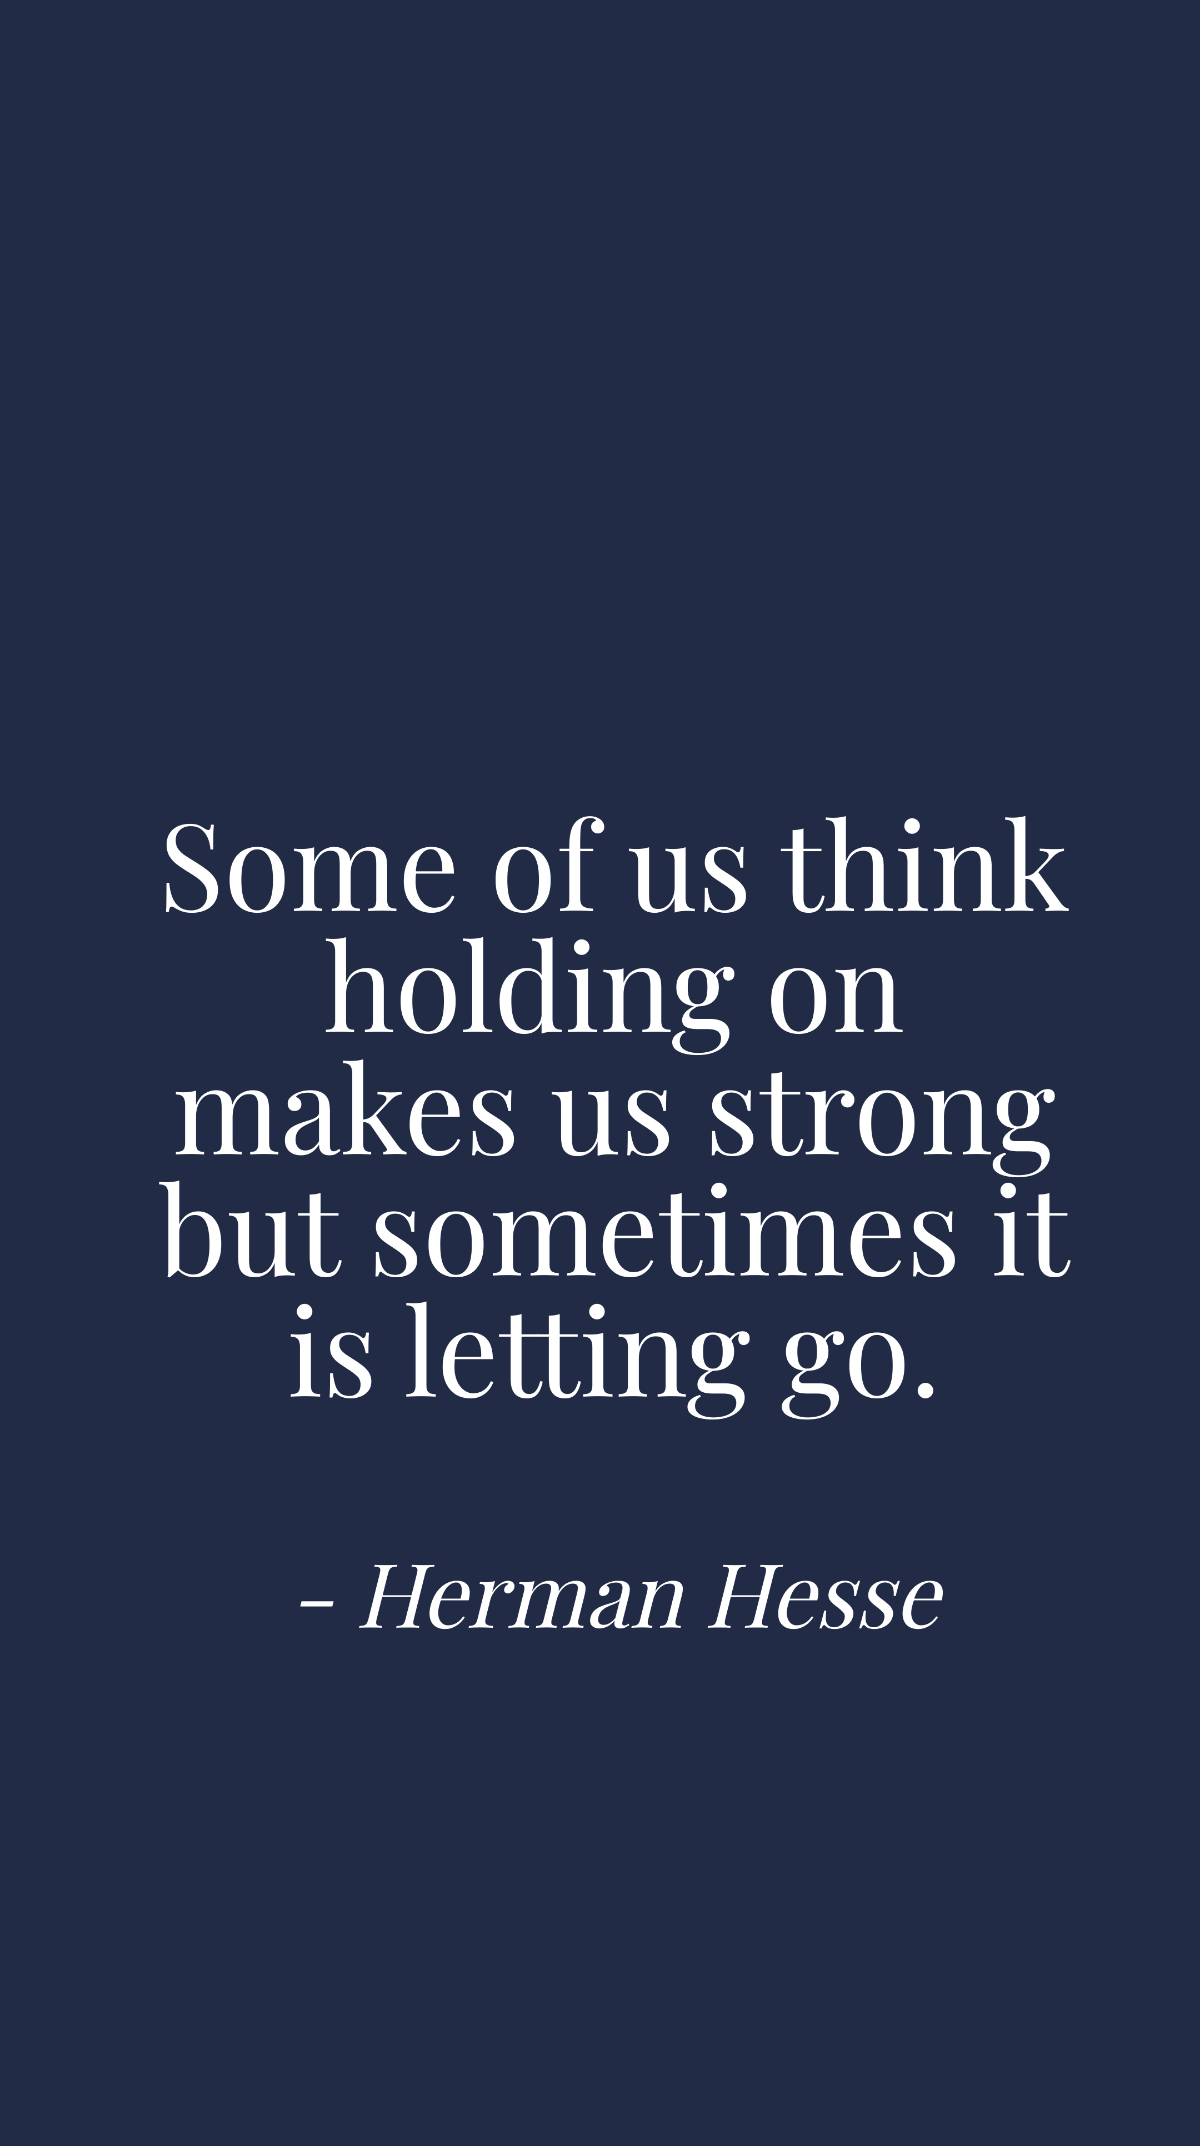 Free Herman Hesse - Some of us think holding on makes us strong but sometimes it is letting go. Template